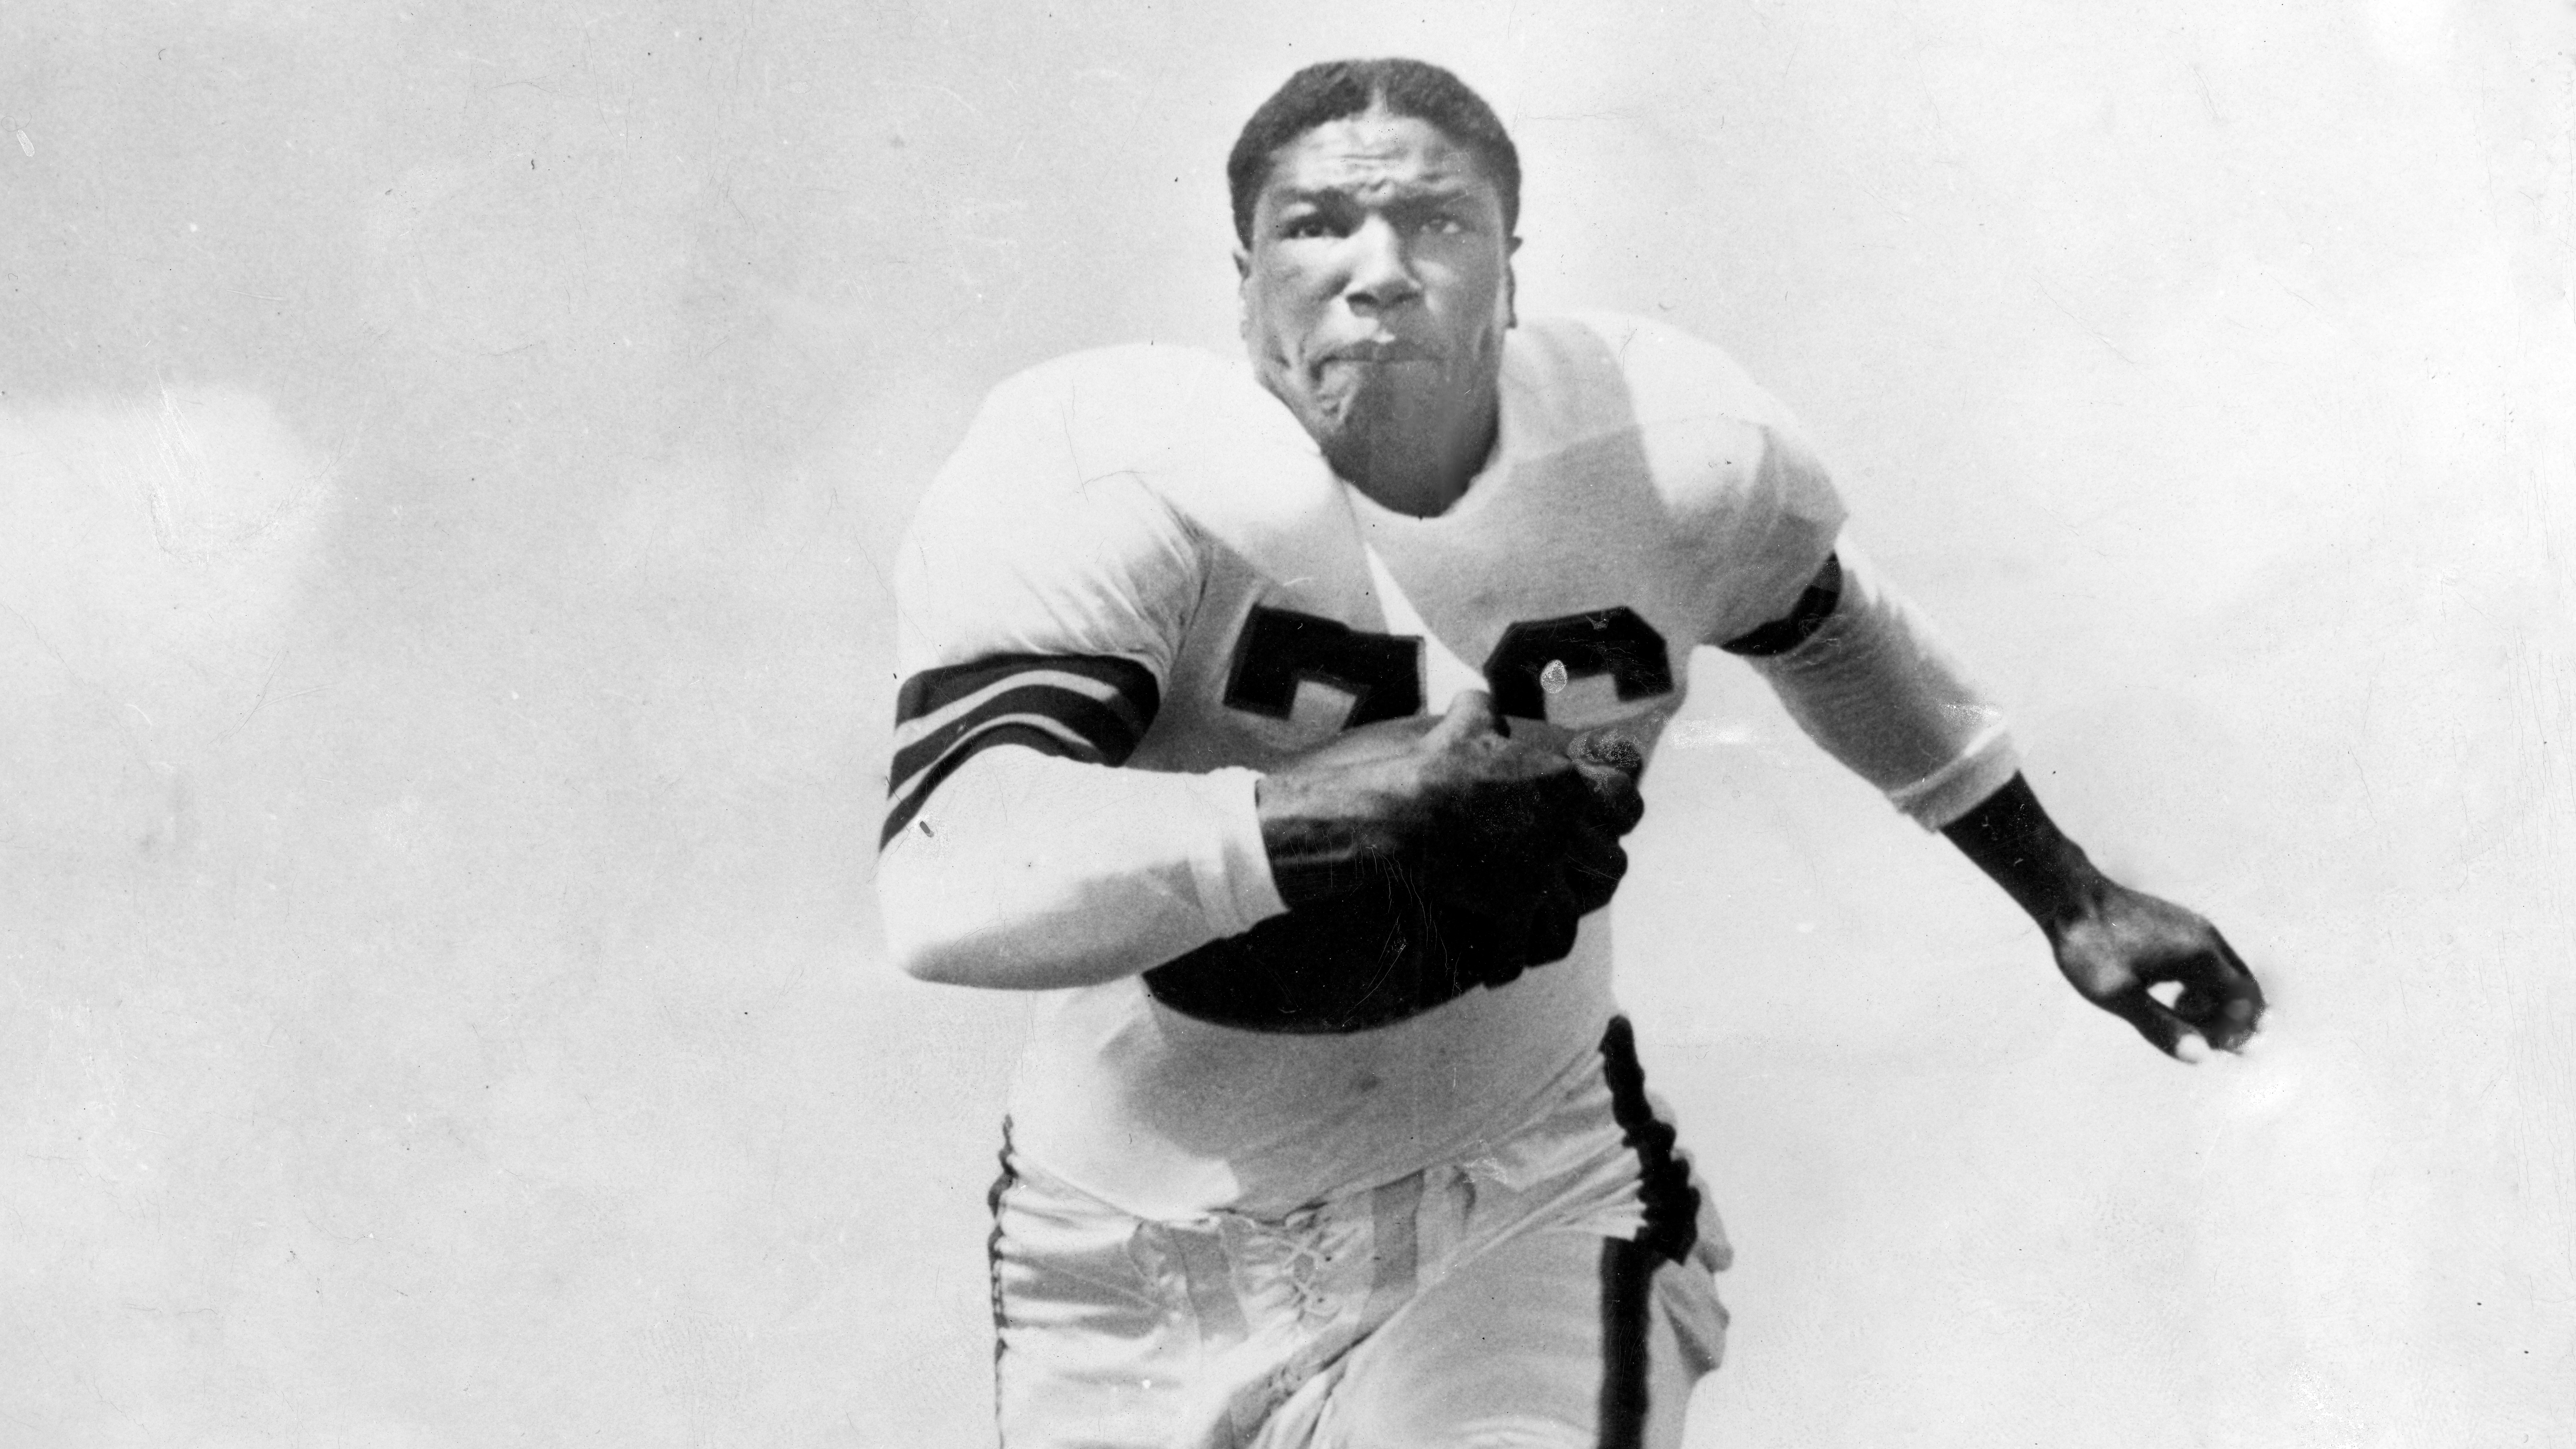 Marion Motley (June 5, 1920 - June 27, 1999) was one of the first Black men to play professional football